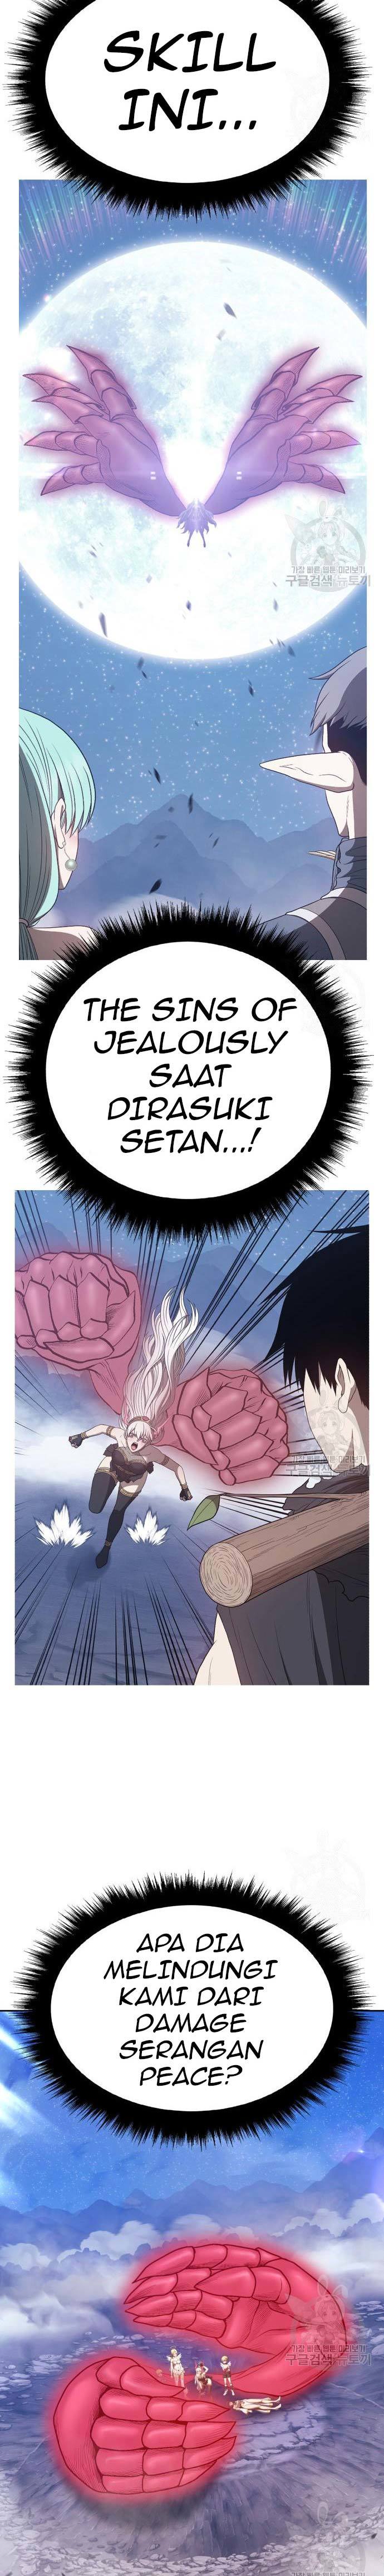 +99 Wooden Stick Chapter 74